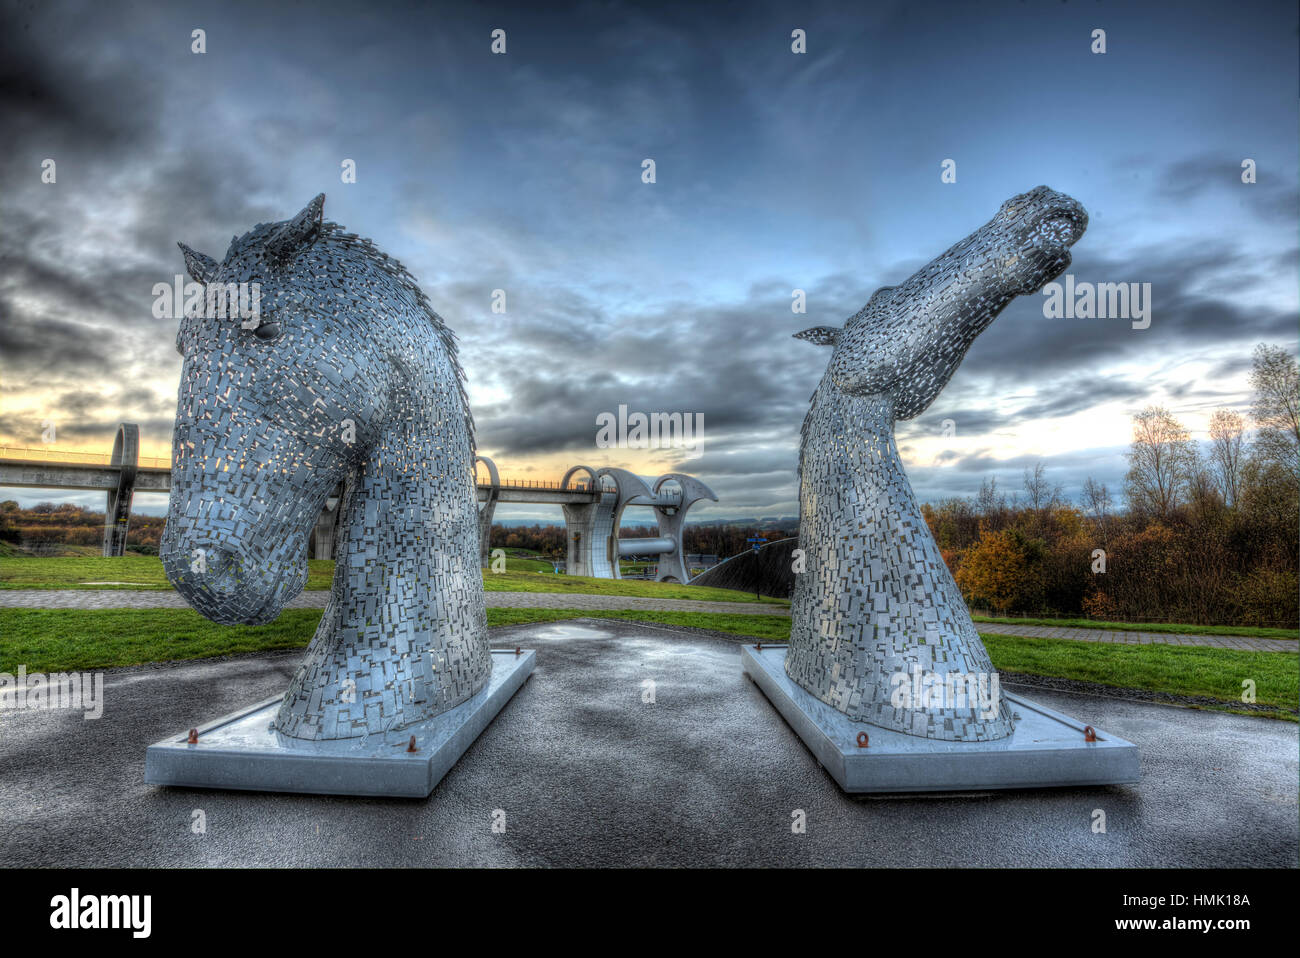 The 'mini Kelpies' 3 metre high small model versions of the Falkirk canal Kelpies sculptures on display at the Falkirk Wheel. Stock Photo